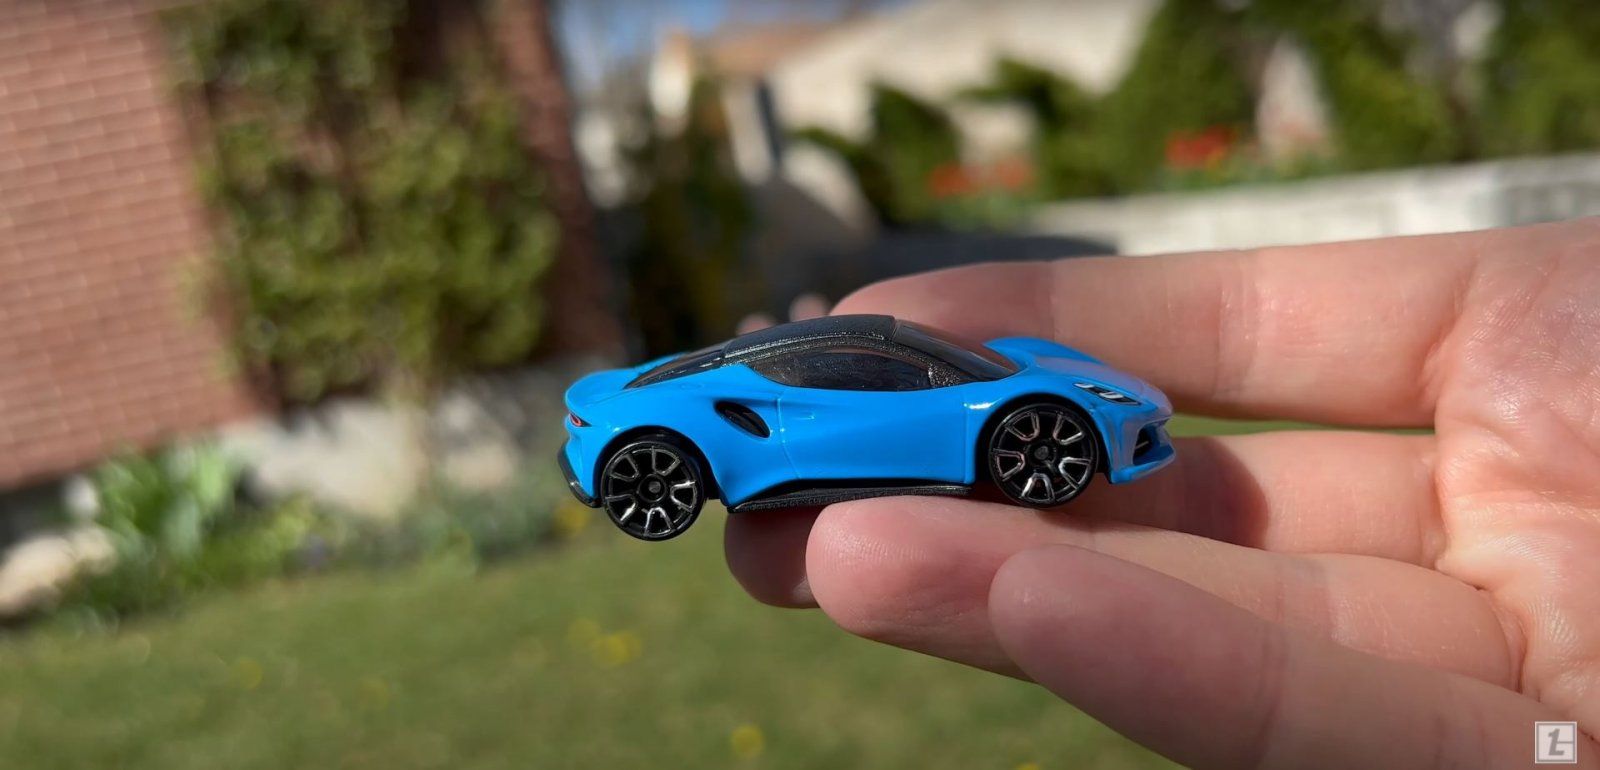 mattel-reveals-7-new-hot-wheels-vehicles-you-can-get-them-in-2022-and-2023_3.jpg